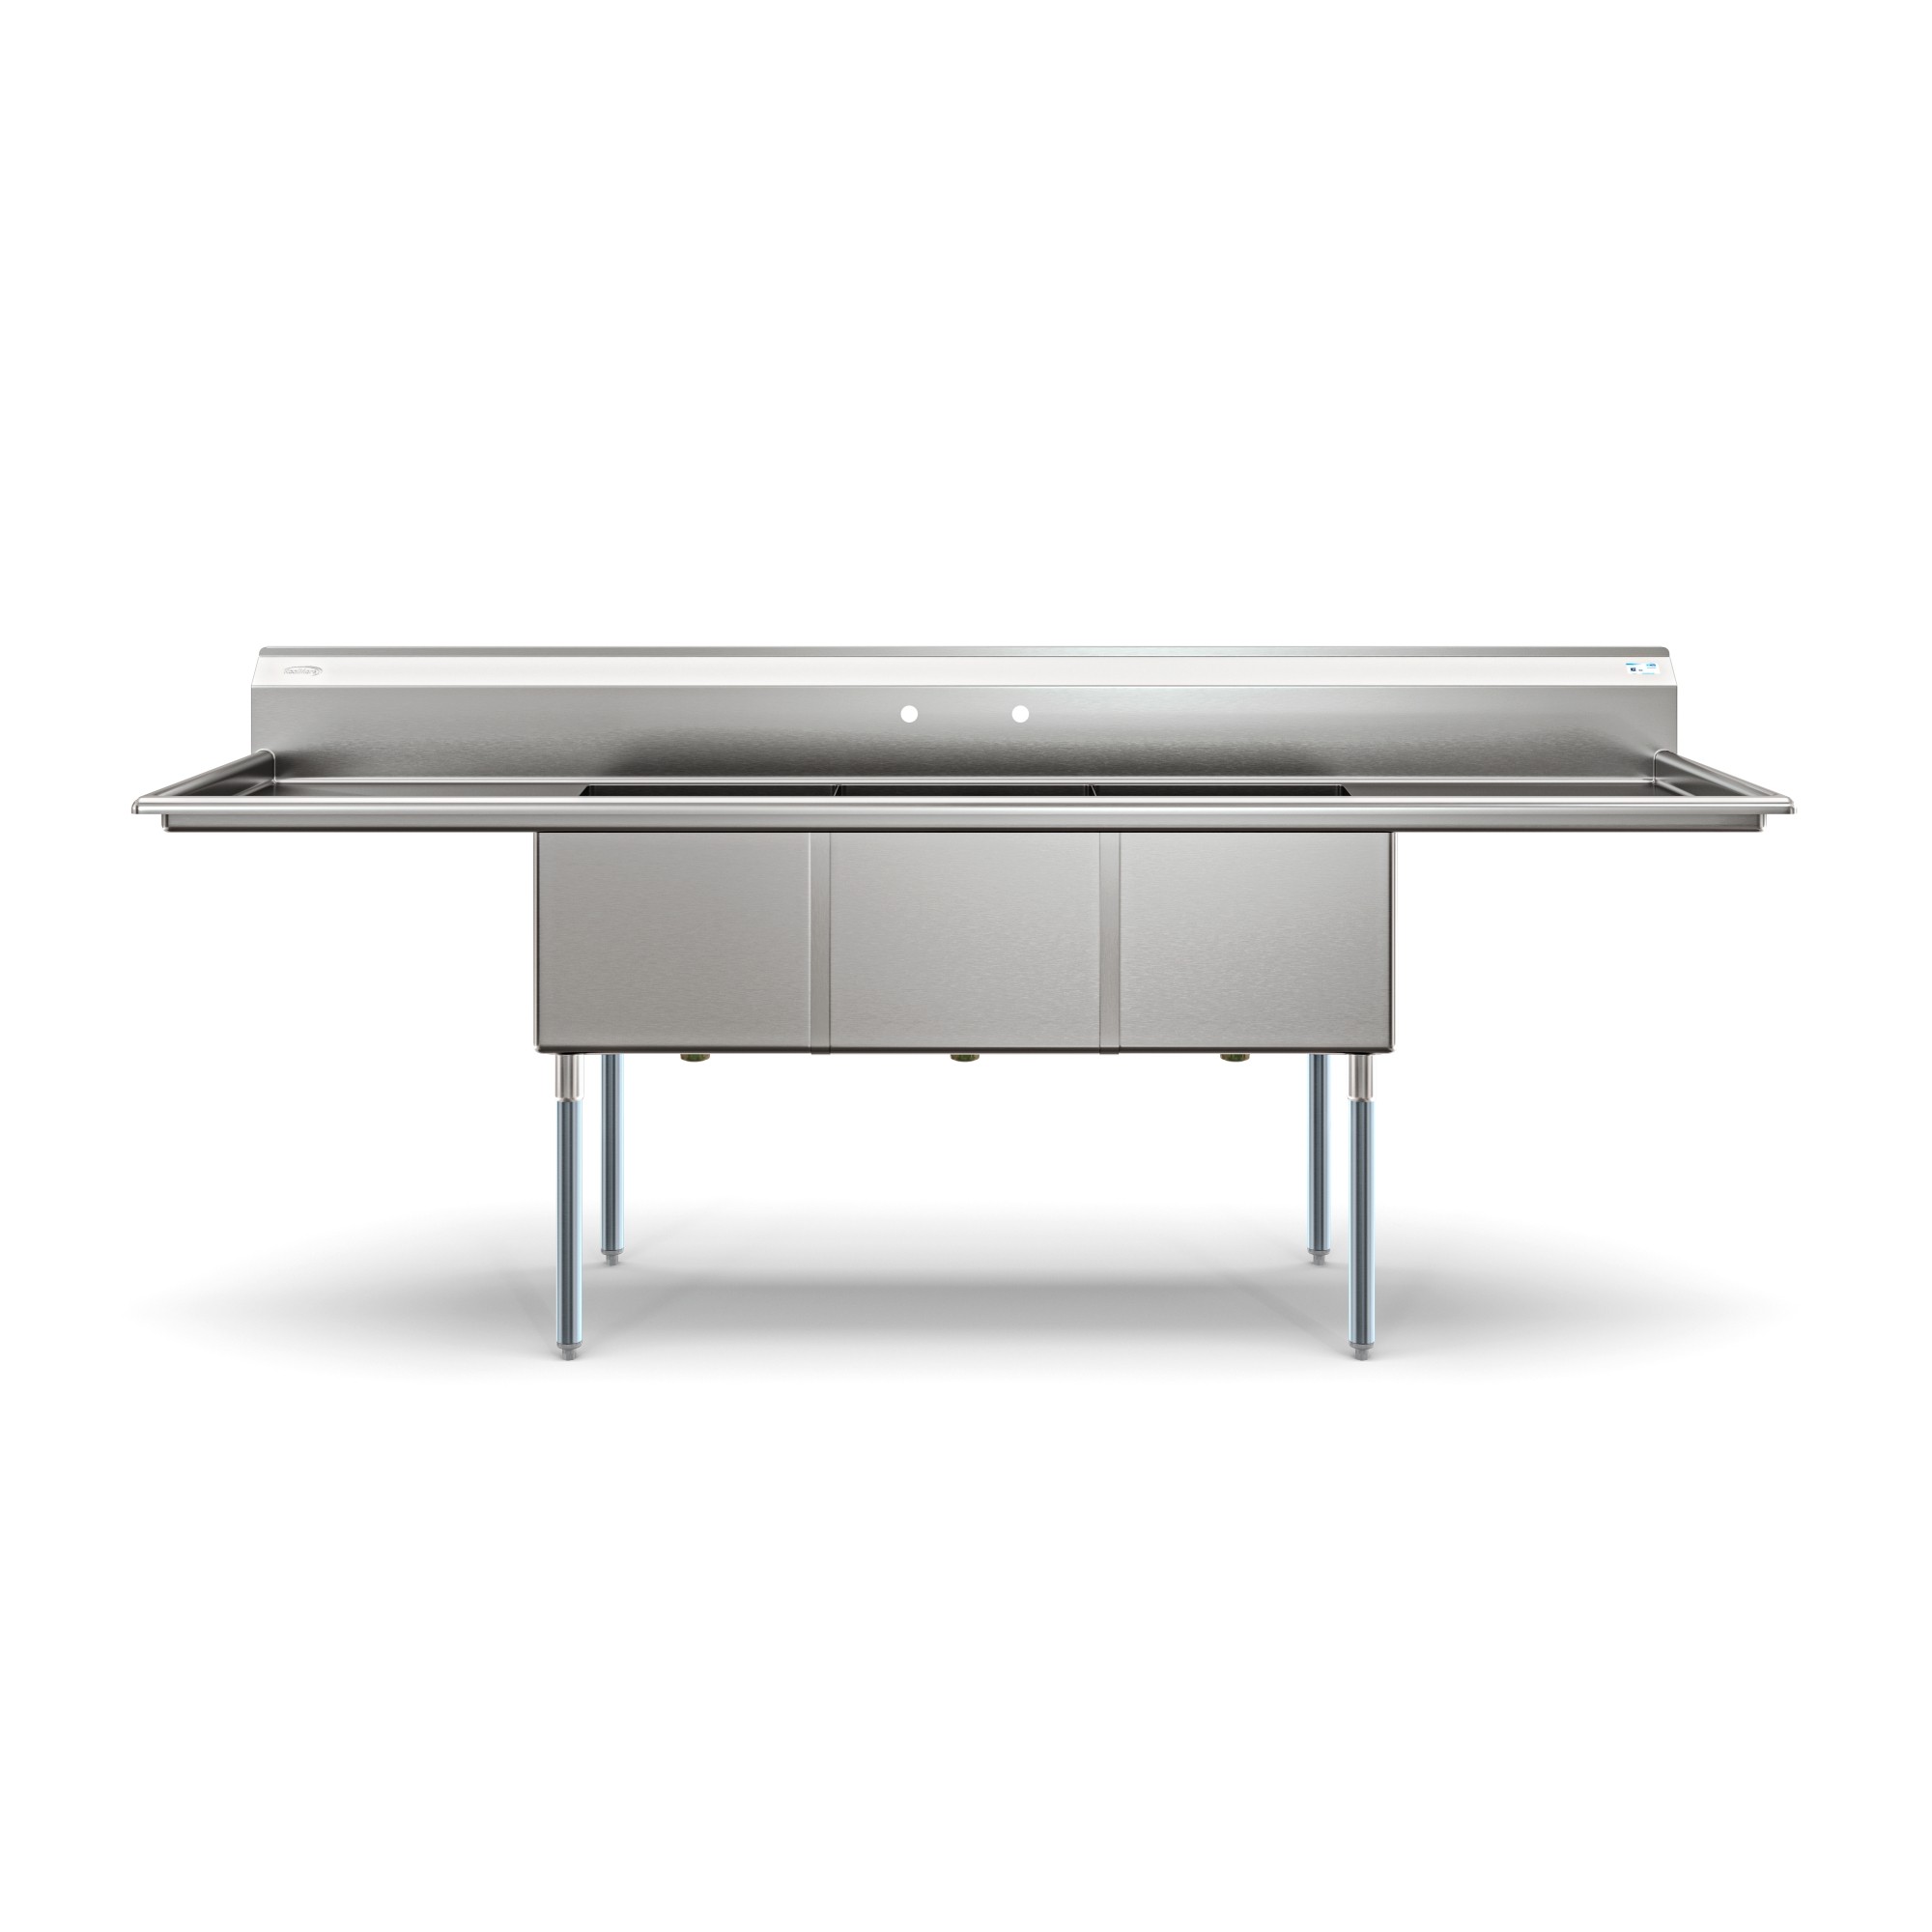 Koolmore KM-SC182414-24B3 102" Three Compartment 18-Gauge Stainless Steel Sink with Two Drainboards